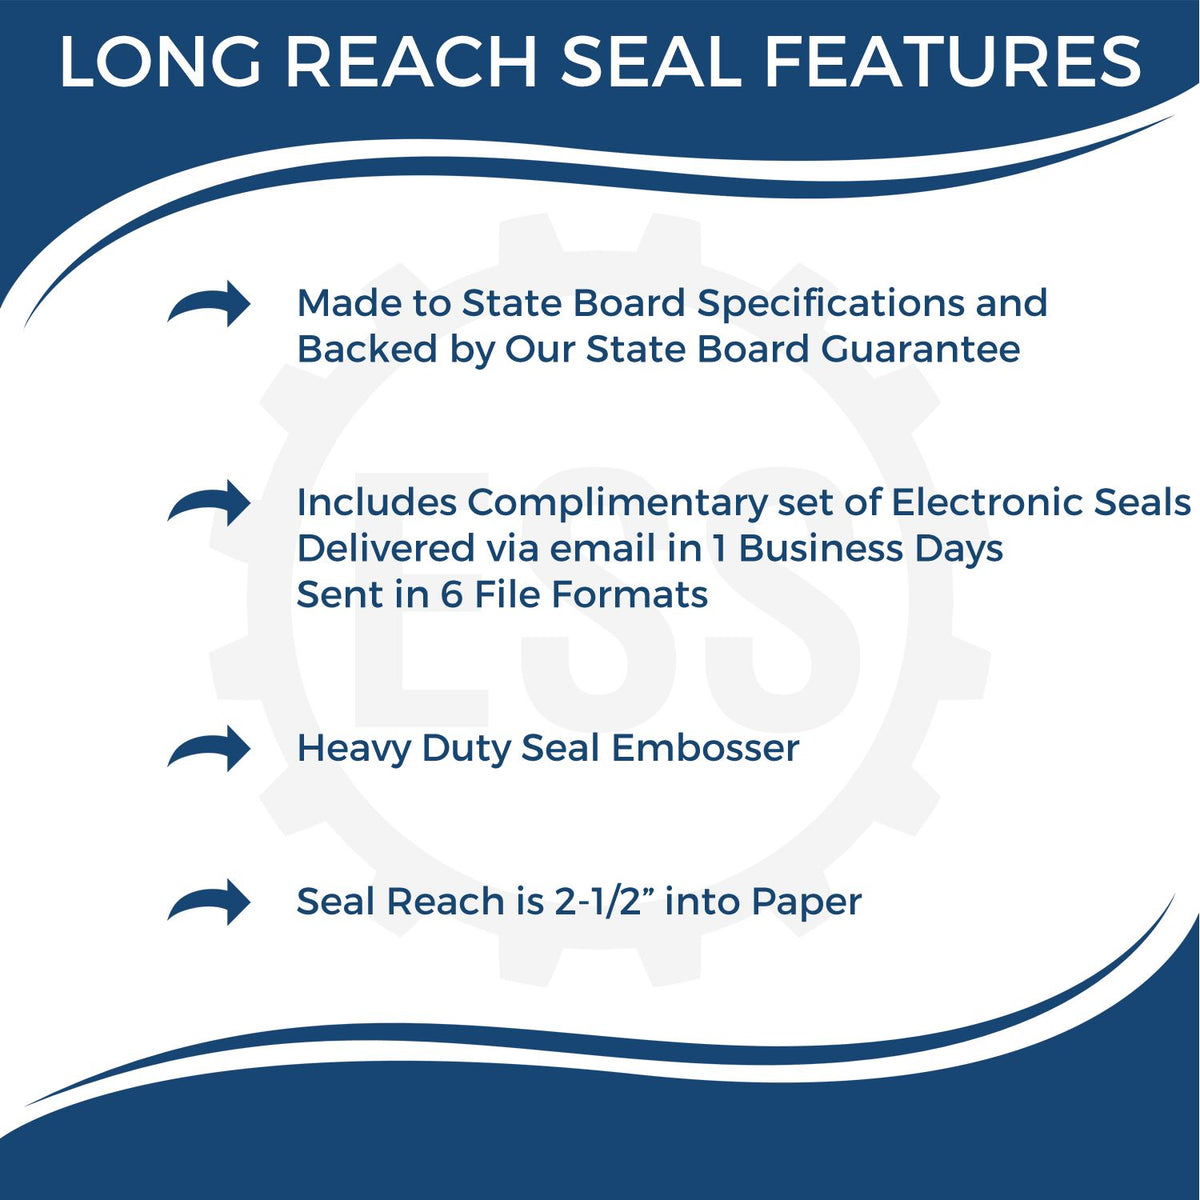 A picture of an infographic highlighting the selling points for the Long Reach Washington PE Seal